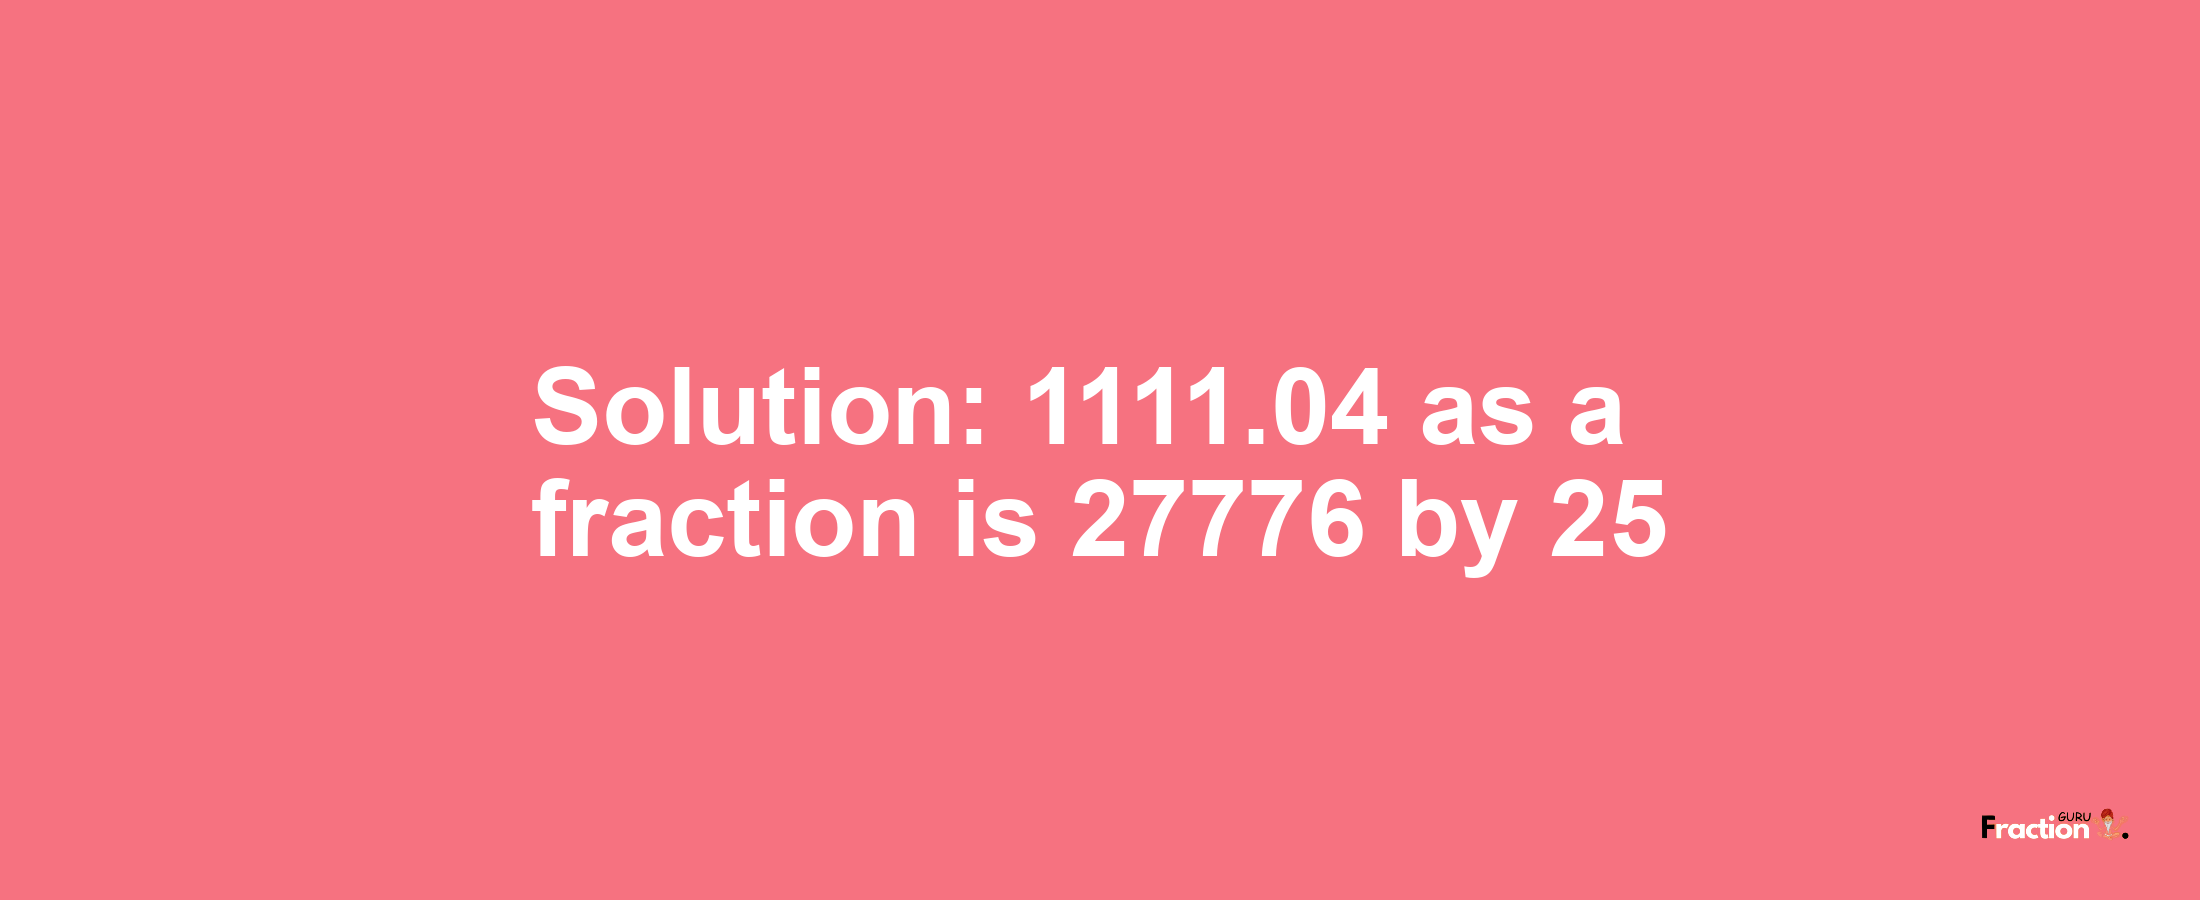 Solution:1111.04 as a fraction is 27776/25